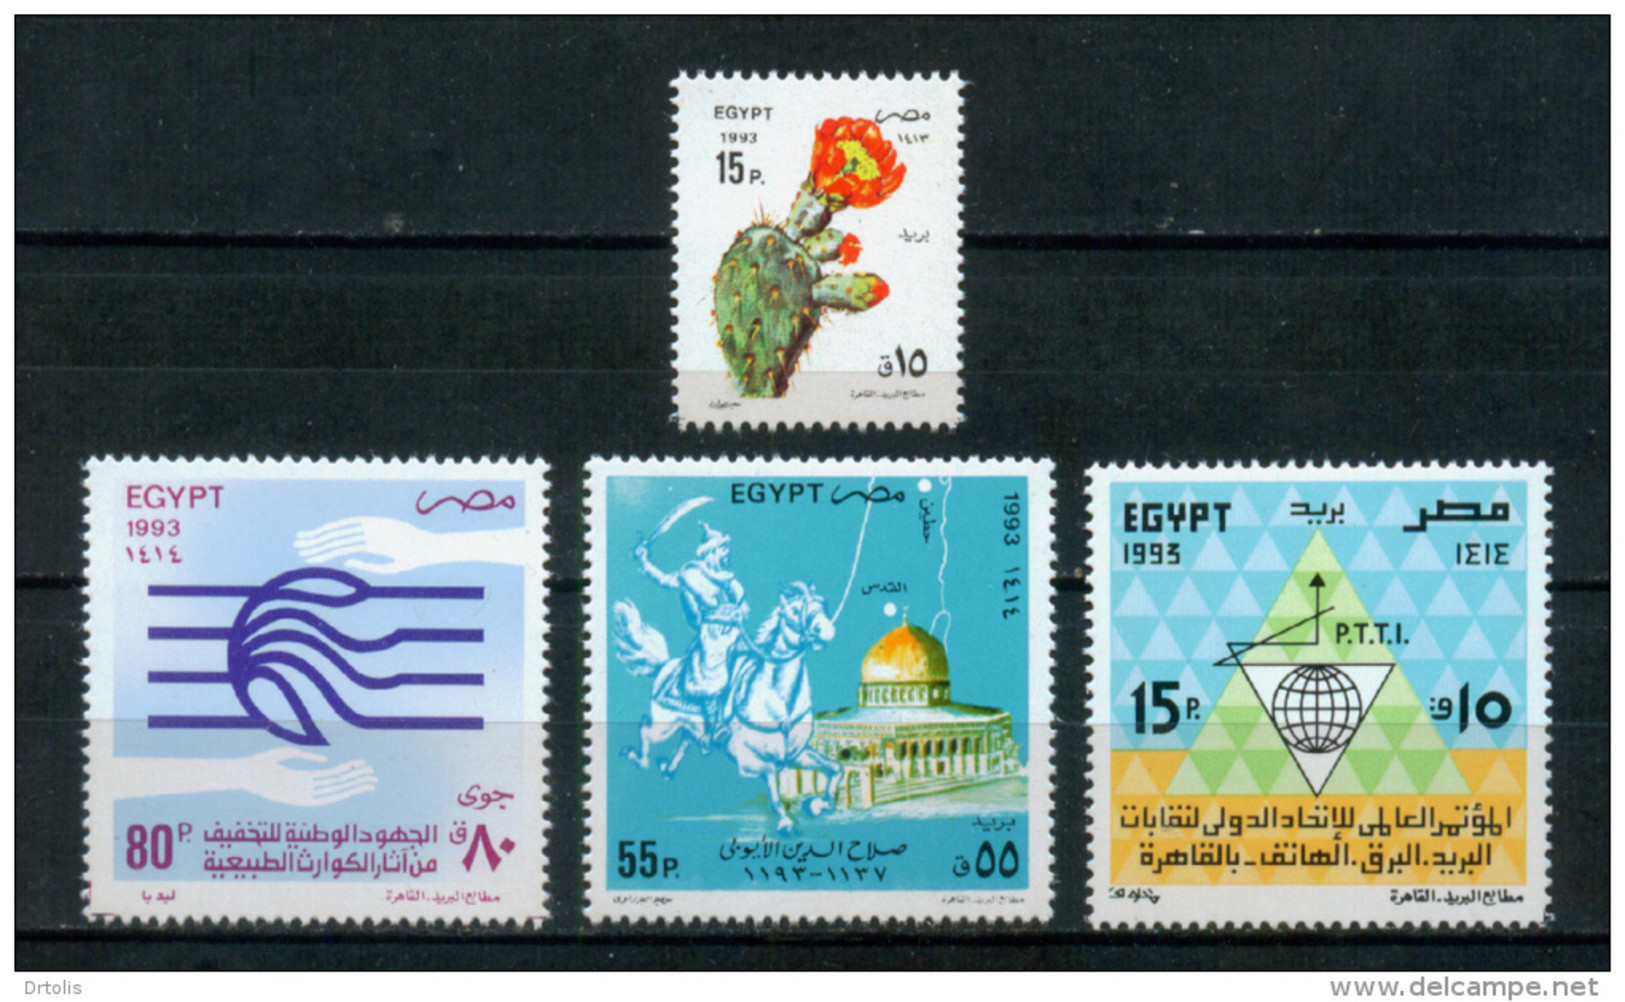 EGYPT / 1993 / COMPLETE YEAR ISSUES / MNH / VF/ 10 SCANS